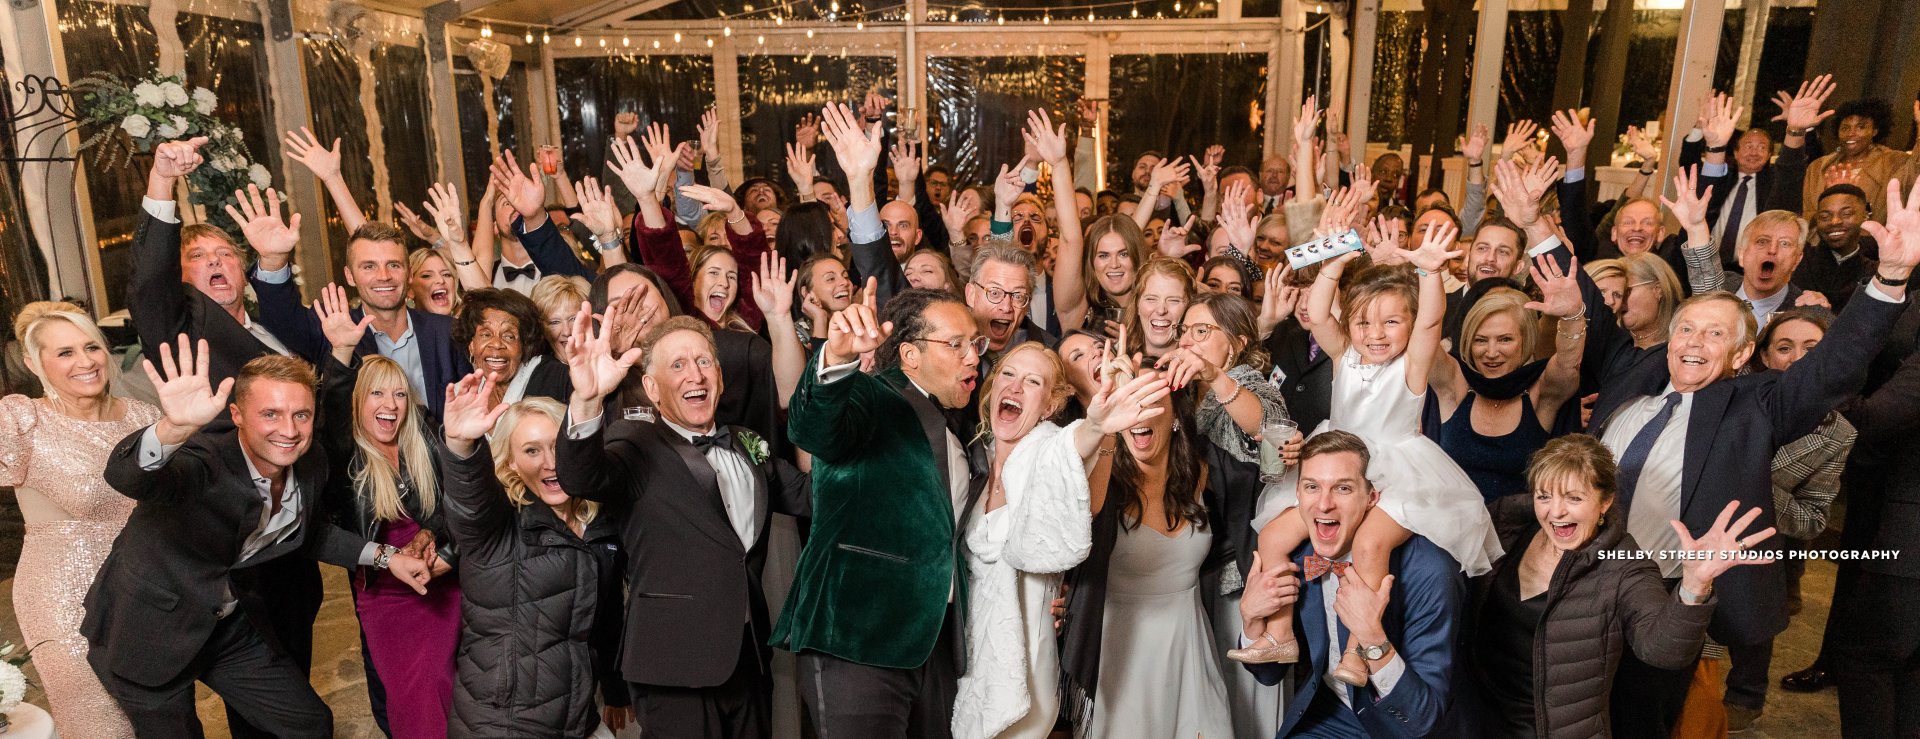 Group of people celebrating at a wedding reception with hands in the air and big smiles on their faces